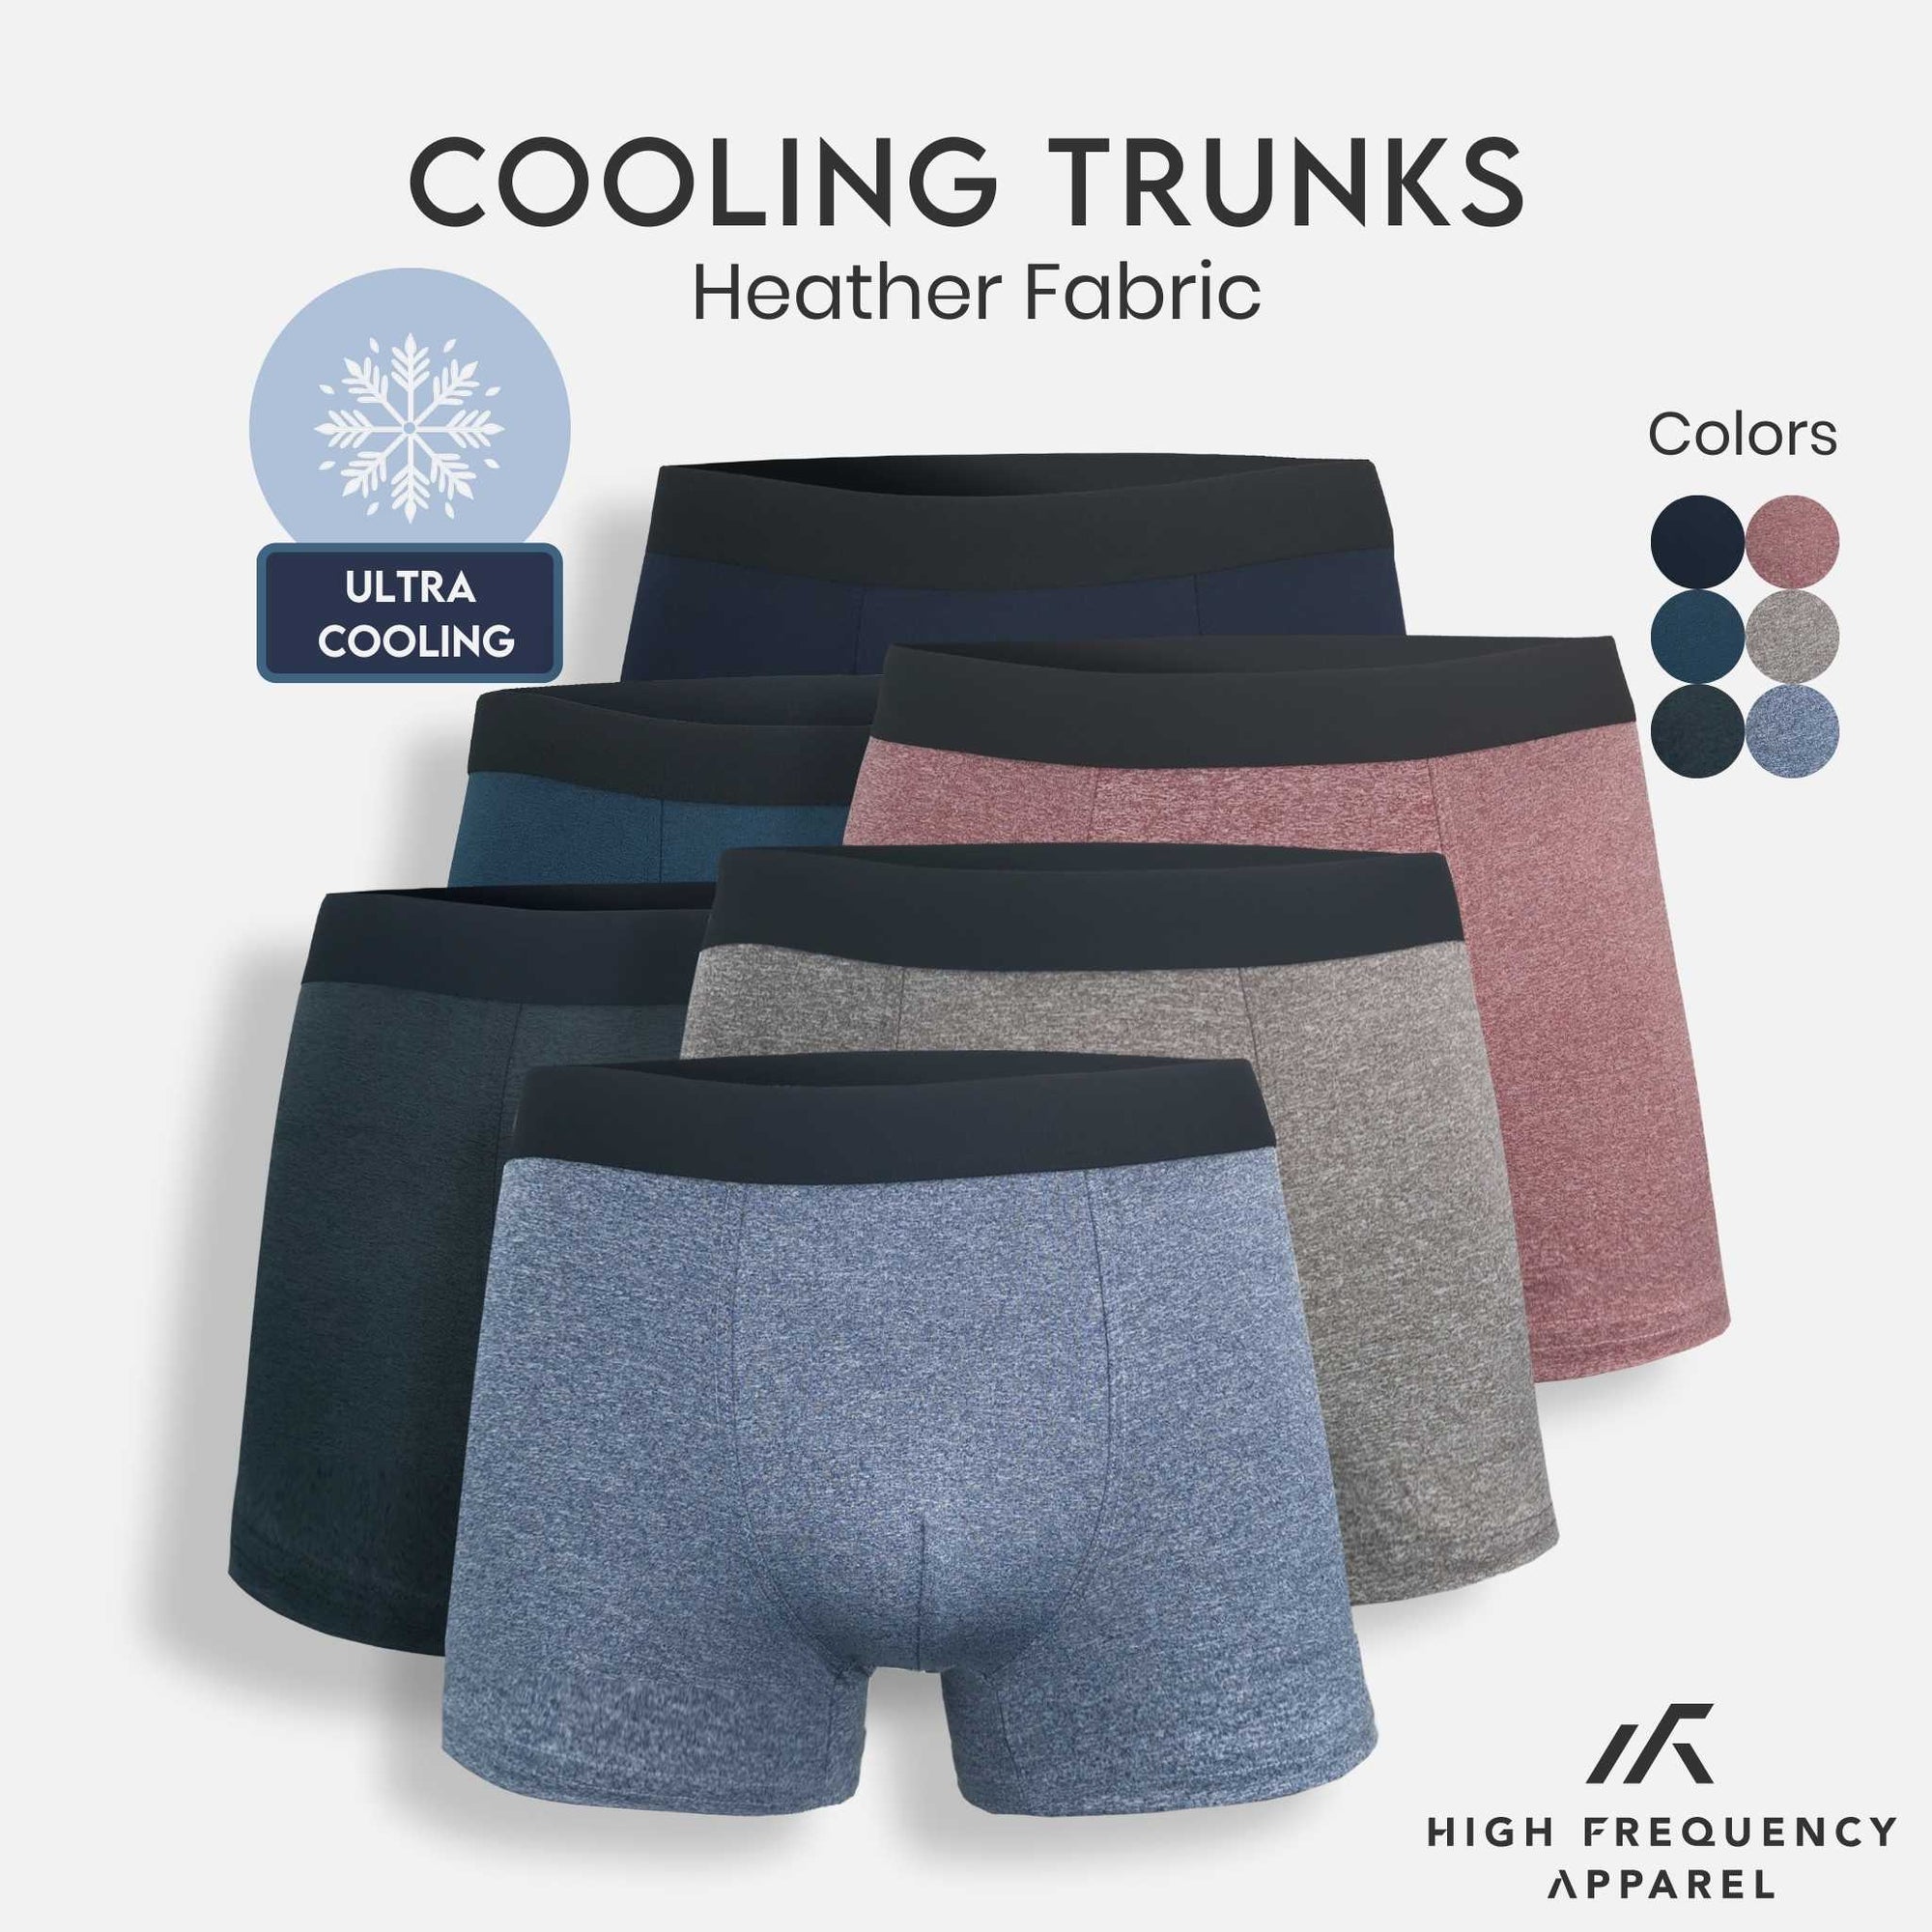 Cooling Trunks